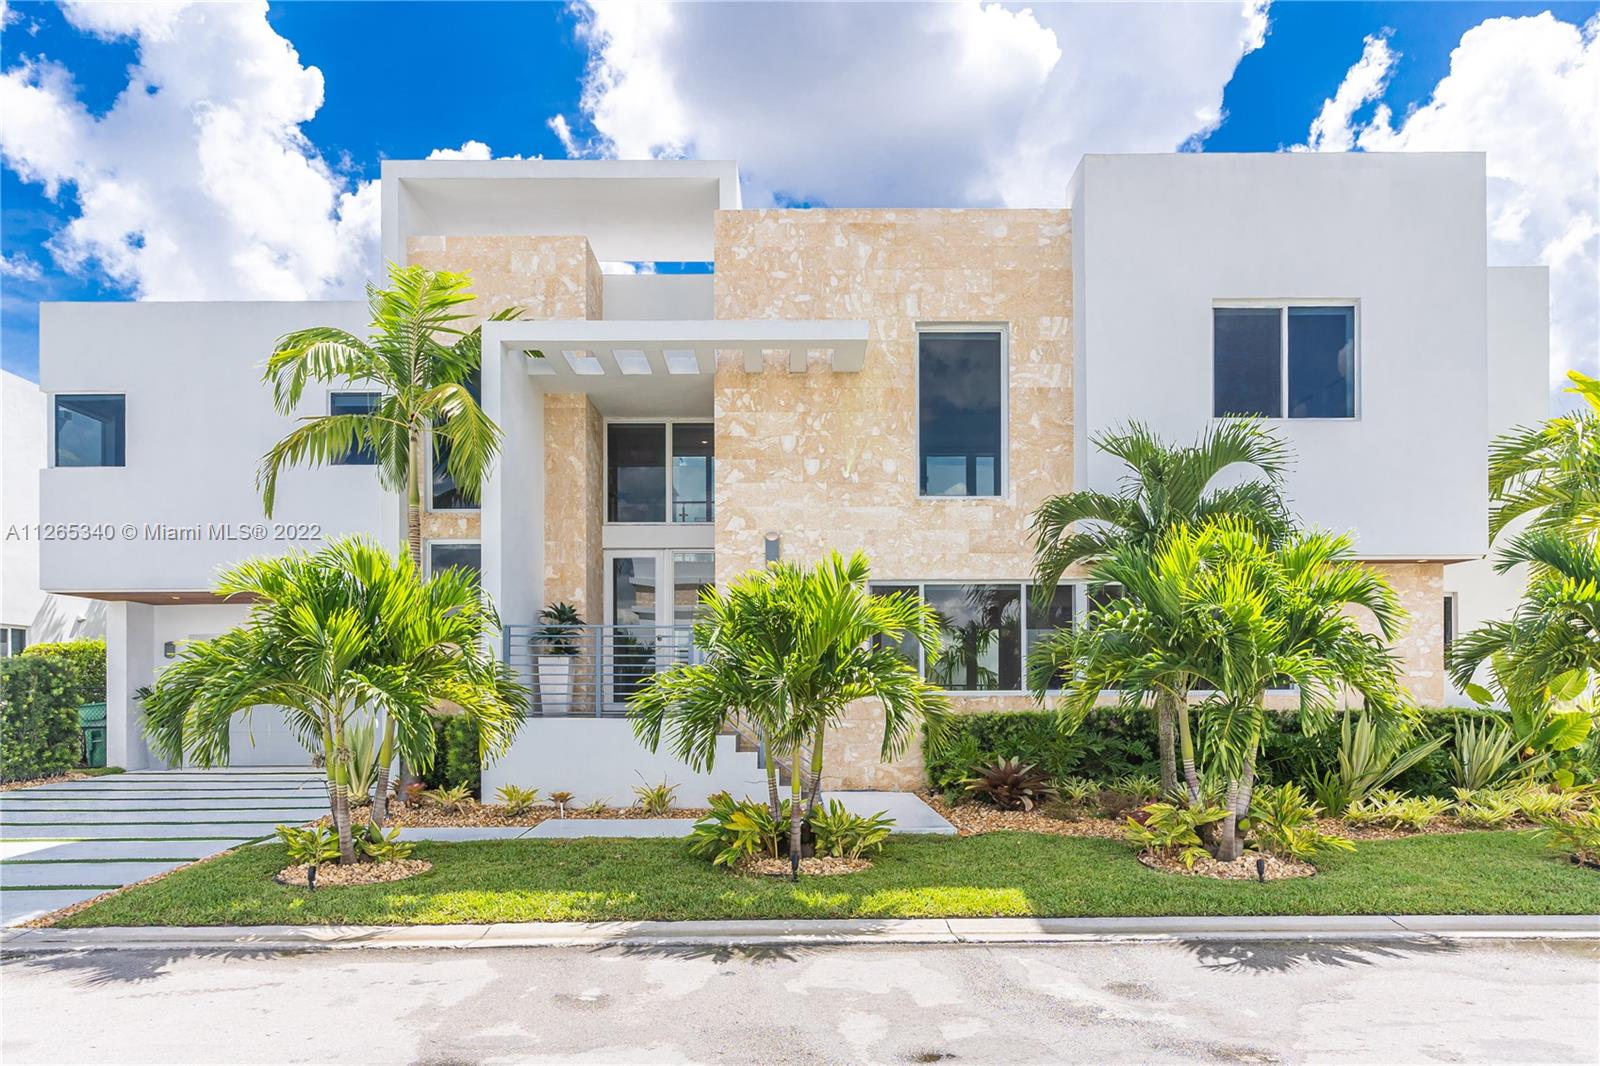 Modern & totally remodeled home in Doral. Fully furnished by Artefacto! 2018 Built. Corner house-2 story, 4BR/5 Full BA. Ultra-modern wine cellar display, Saltwater-Heated Pool w/water and lighting features, new cement driveway, tropical landscape, & more. Sophisticated finishes: double-height ceilings in living area, glass railings staircases, 2nd floor terrace w/sitting area w/pool view. Beautiful Kitchen w/BOSCH appliances, European cabinetry & quartz counters. 100% smart home by Phone (able to control: A/C, garage door, shades, TVs, Pool water & light features, landscape Lighting, indoor/outdoor accent lighting throughout, Terrace lighting, Wine cellar lighting, Etc.). Impact windows/doors. Guard-gated 24/hrs security. Clubhouse w/gym, party room, pool, jacuzzi, sauna, & billiard.